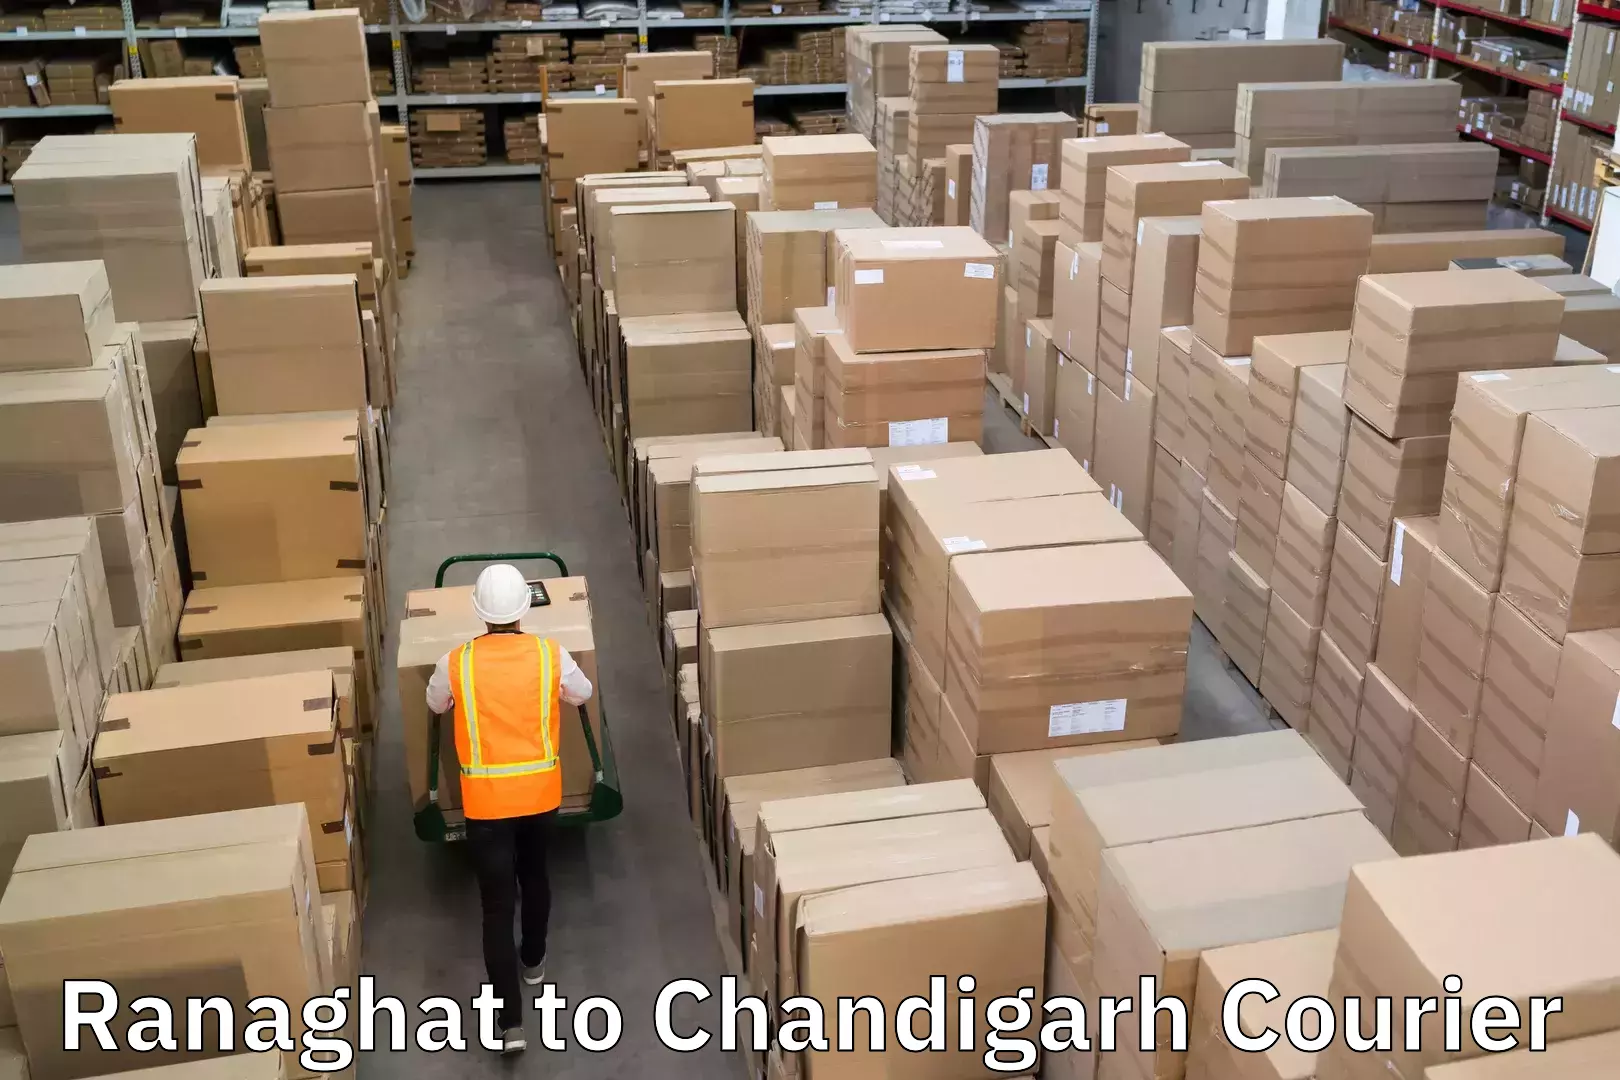 Delivery service partnership Ranaghat to Chandigarh